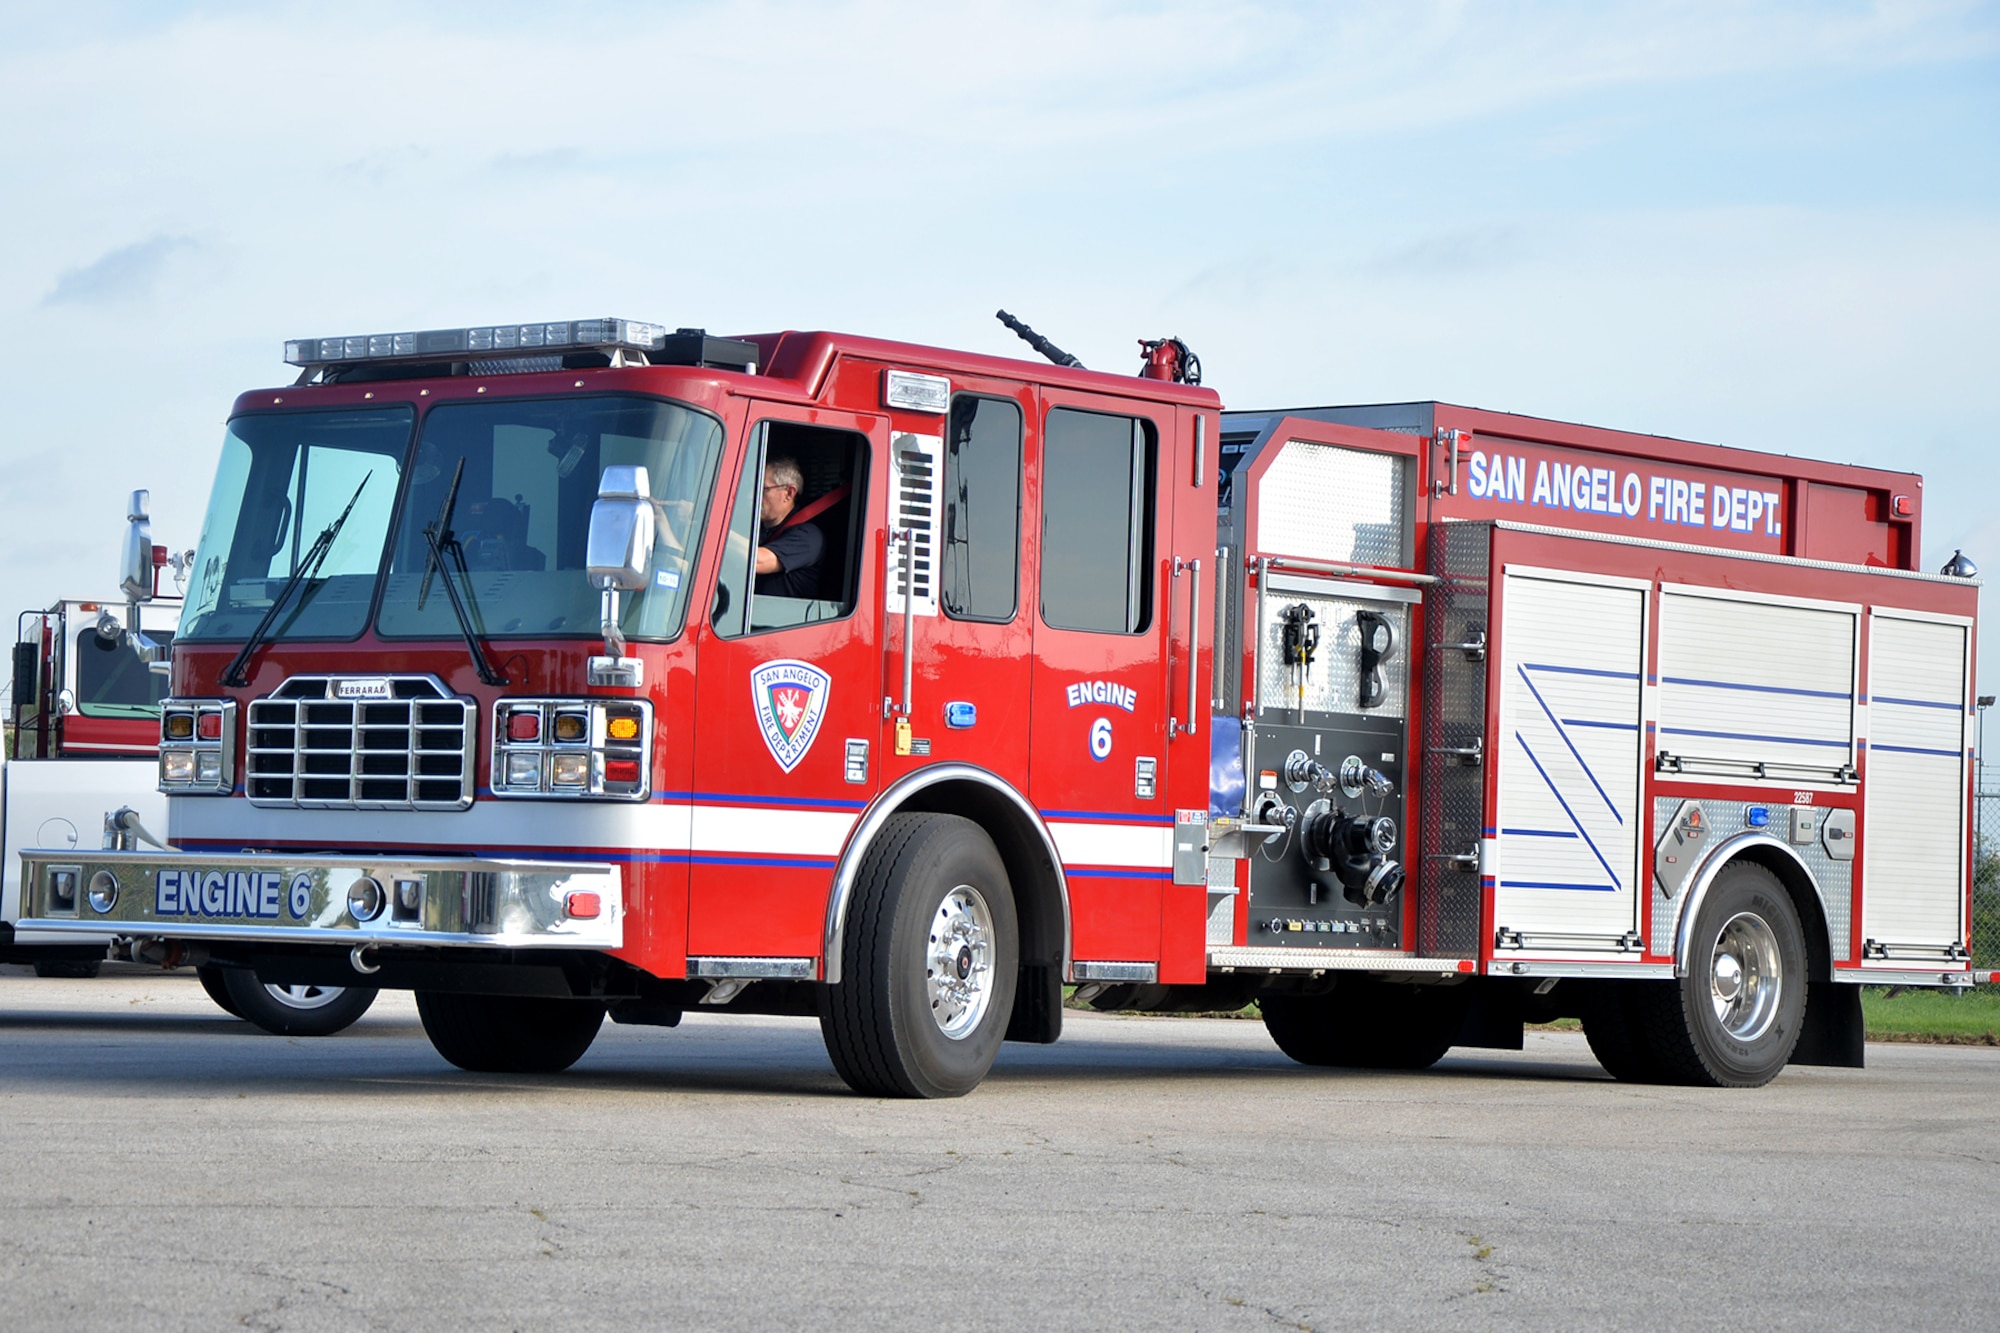 A San Angelo firefighter drives a City of San Angelo fire truck on Goodfellow Air Force Base, Texas, July 8, 2016. The San Angelo Fire Department brought one of its fire trucks onto Goodfellow for maintenance as part of an agreement between Goodfellow and the City of San Angelo. (U.S. Air Force photo by Airman 1st Class Randall Moose/Released)